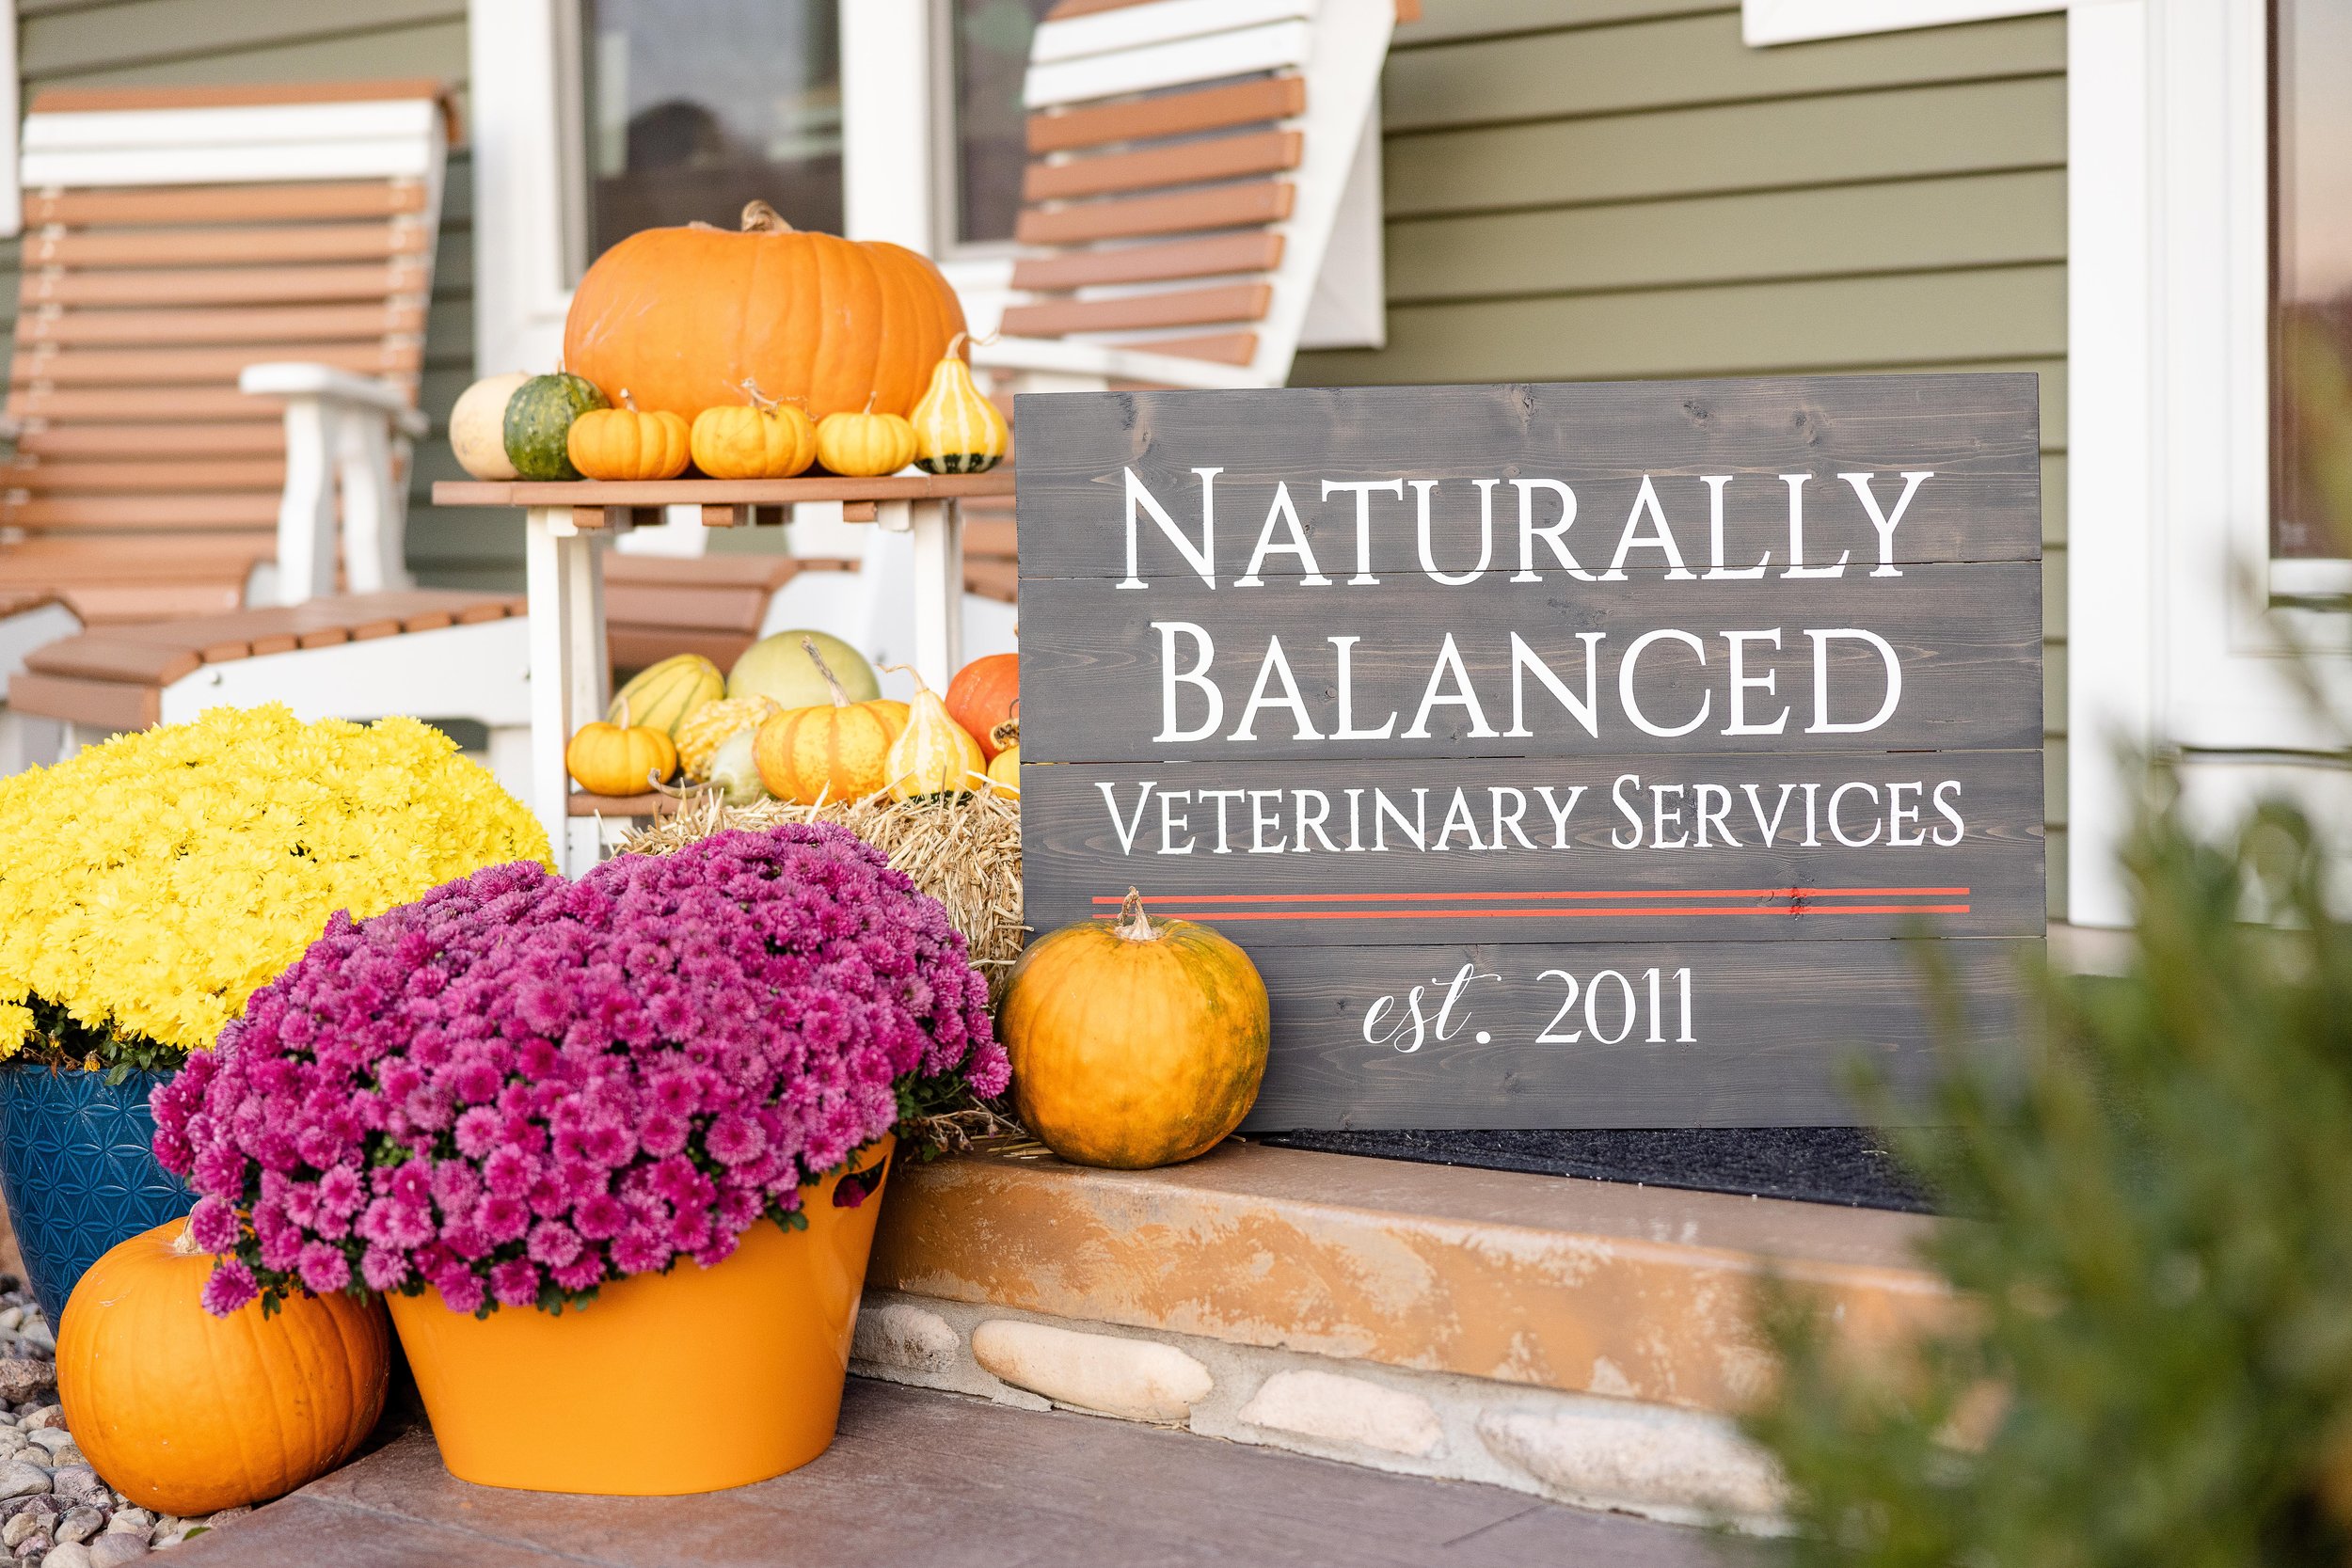 Photoshoot for Dr. Patty with Naturally Balanced Veterinary Services